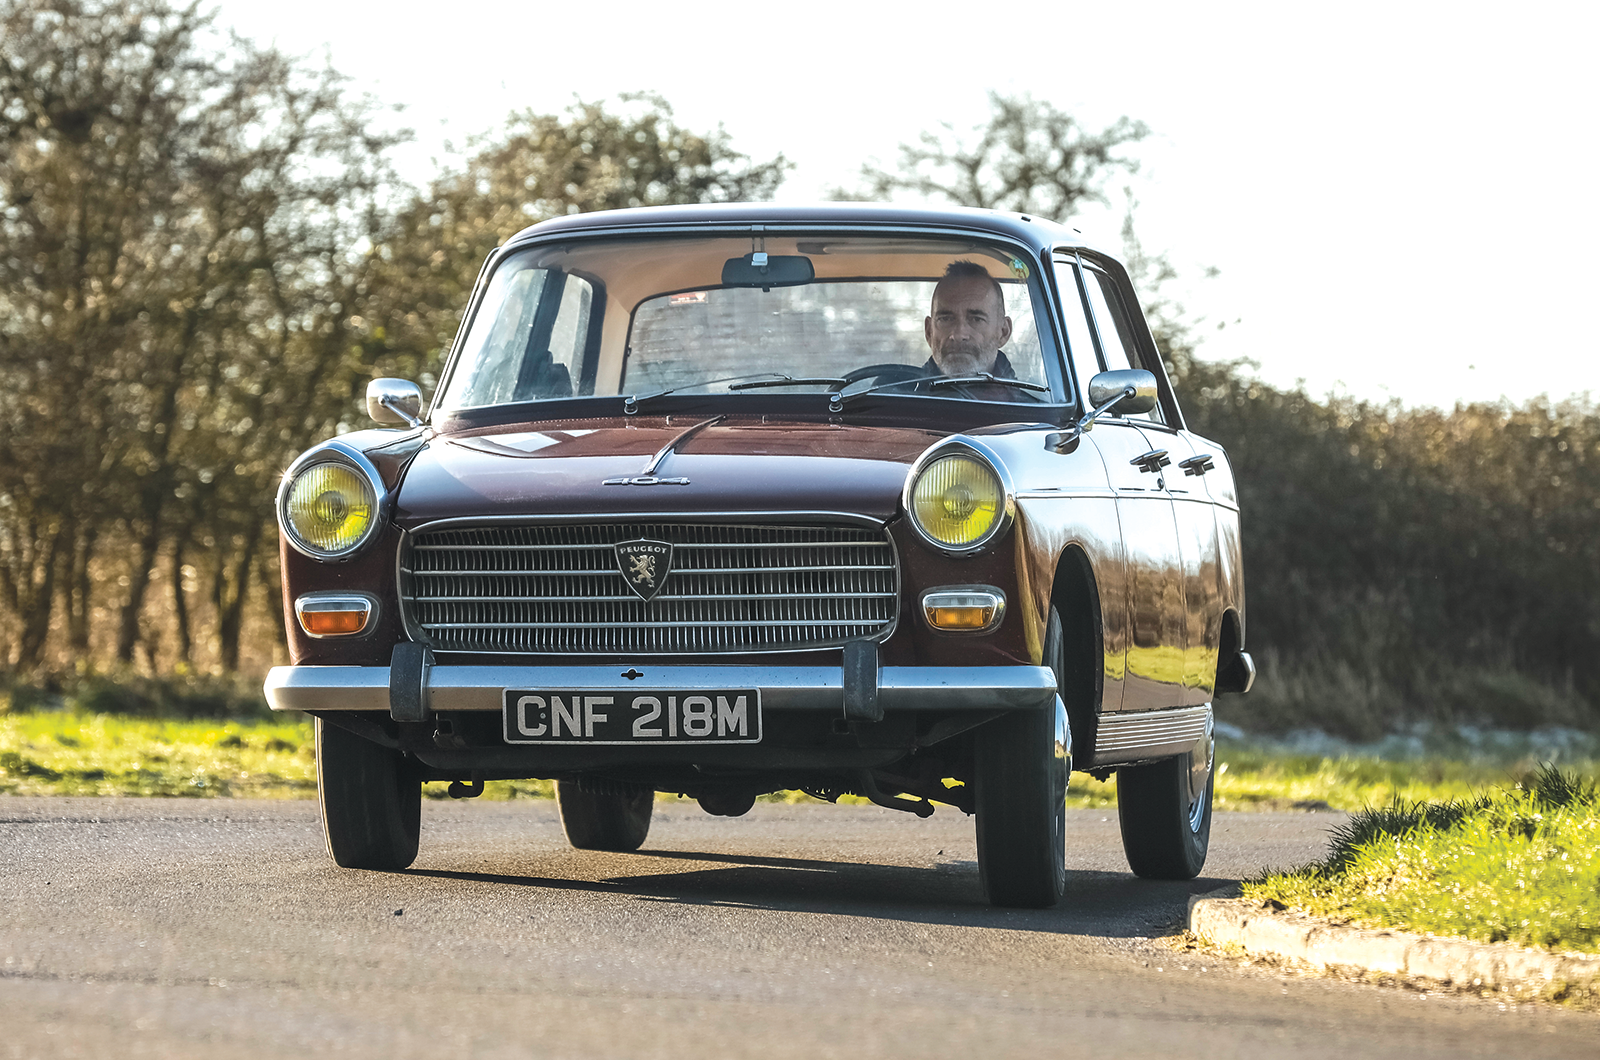 Classic & Sports Car – Fiat 1500L vs Peugeot 404: the shape of things to come